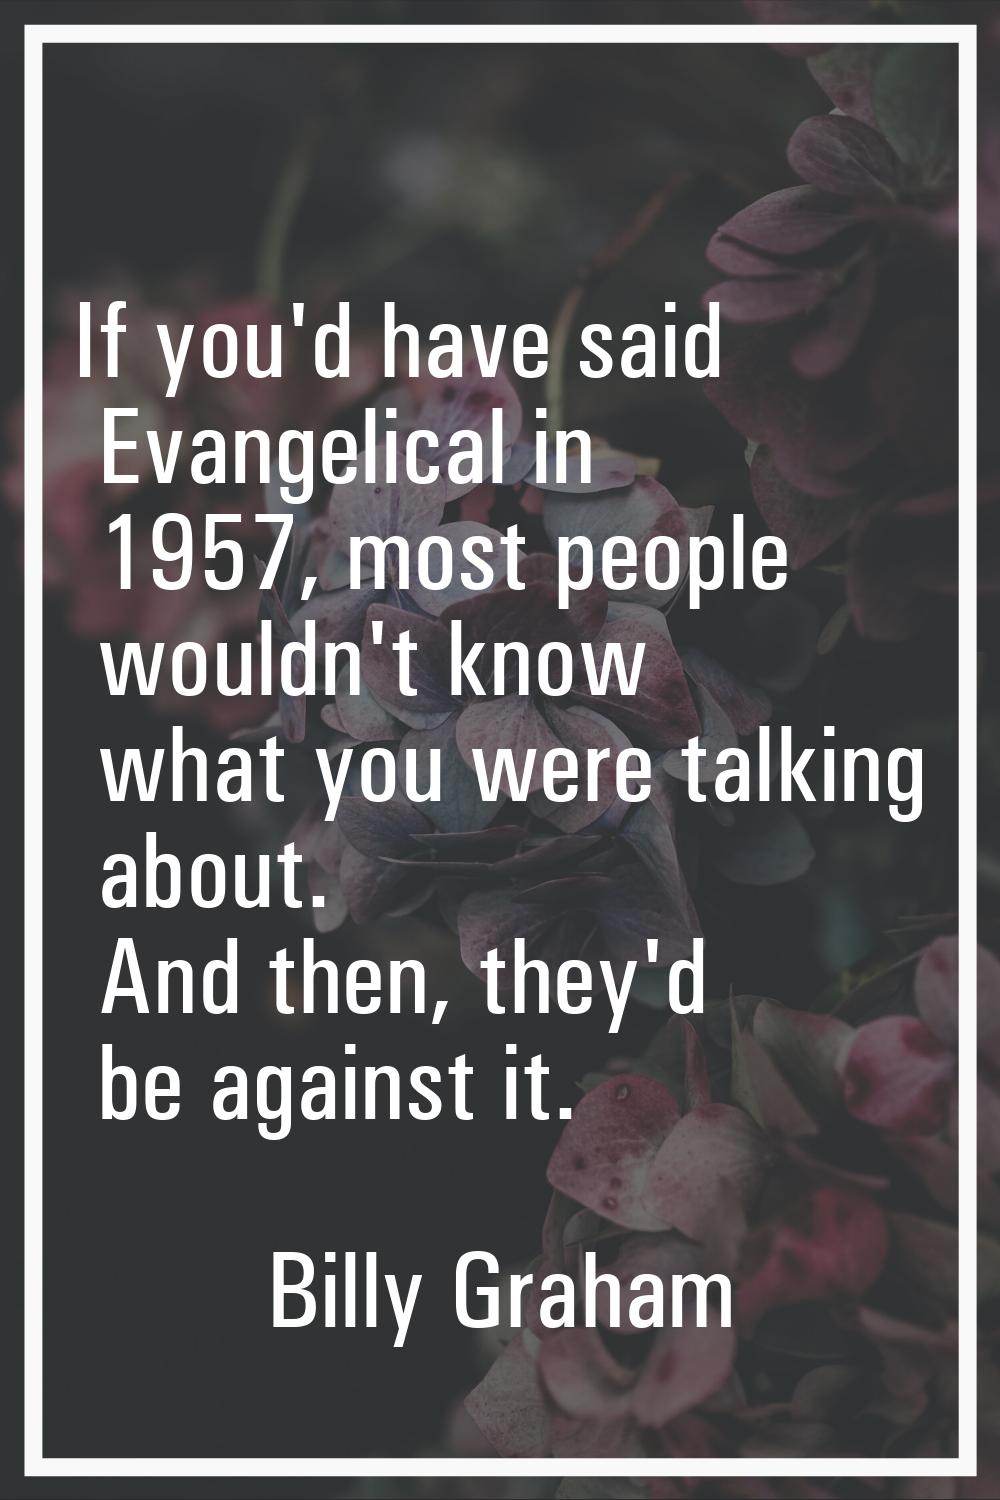 If you'd have said Evangelical in 1957, most people wouldn't know what you were talking about. And 